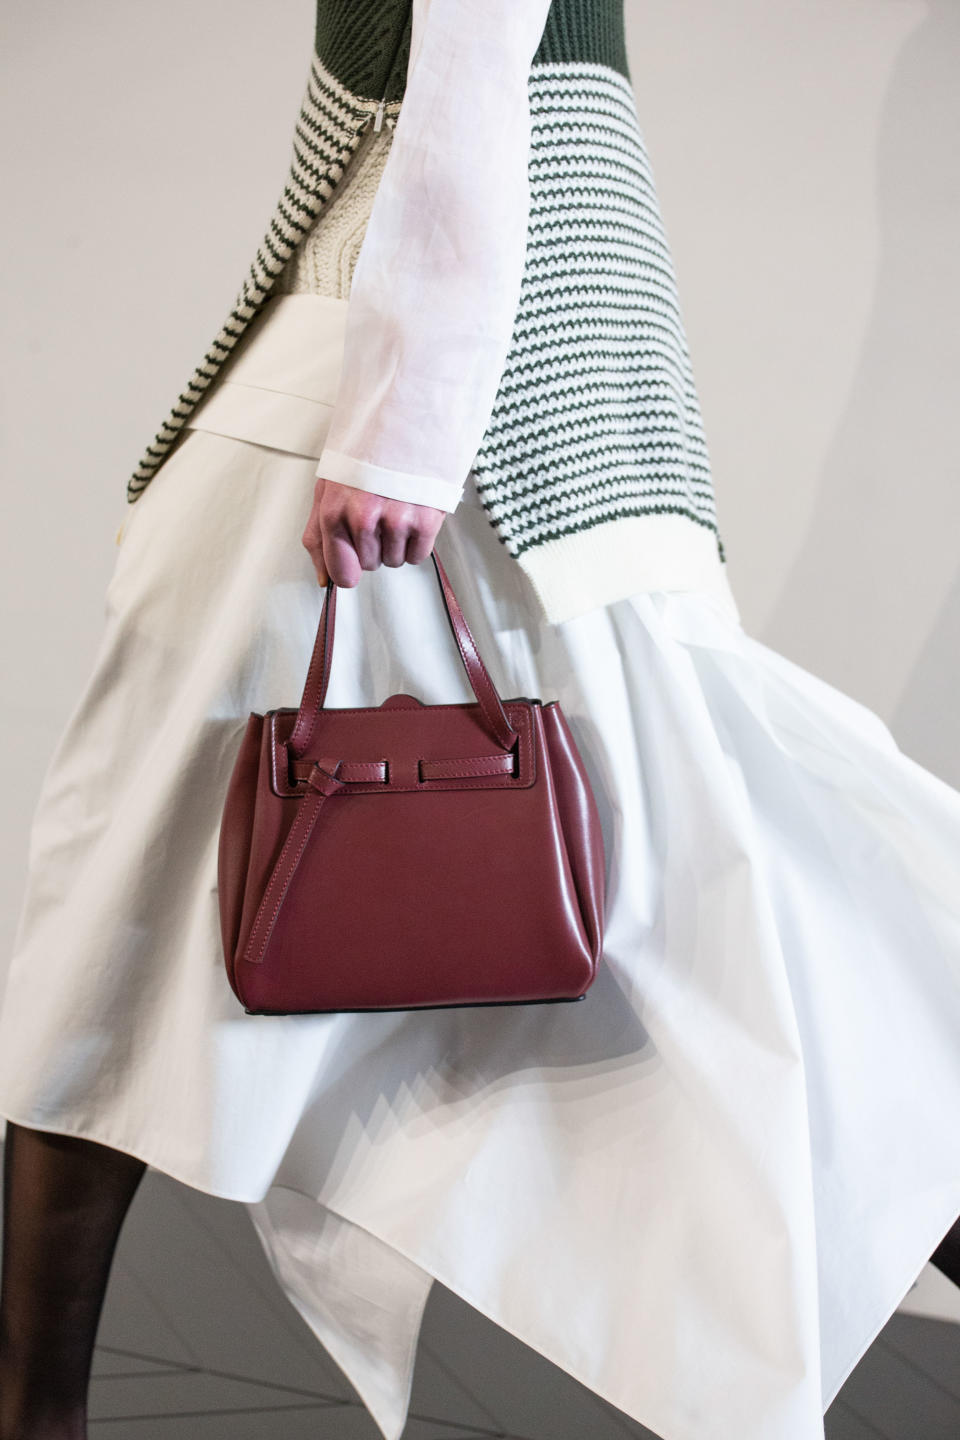 Shopping: Micro and mini bags trend